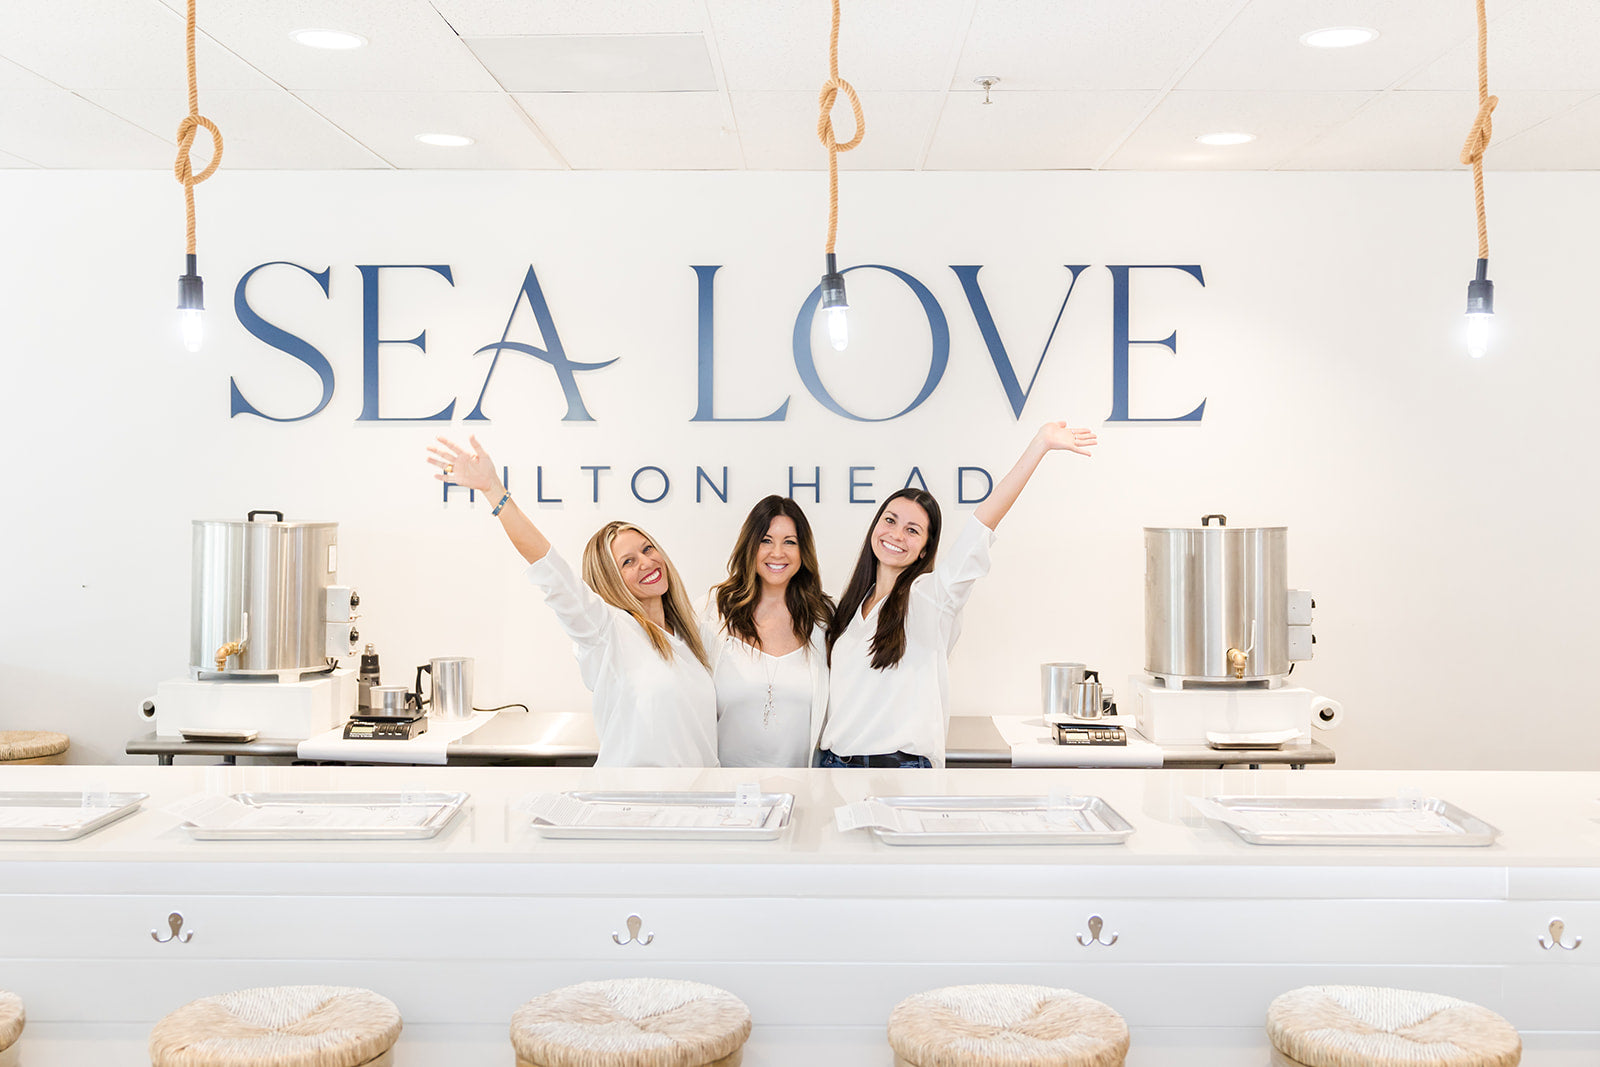 Three joyful women celebrating franchise opportunities at a bright and modern candle bar named "sea love" in hilton head